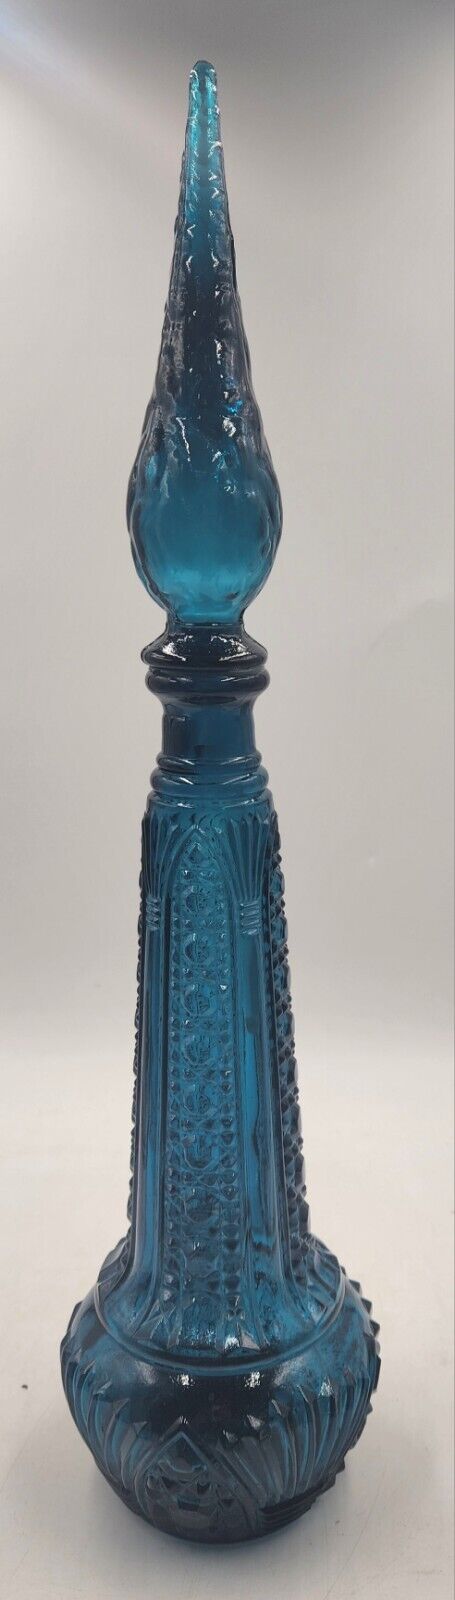 Vintage Peacock/Teal Rossini Genuine Empoli Glass Italy Decanter w/Stopper 18.5\